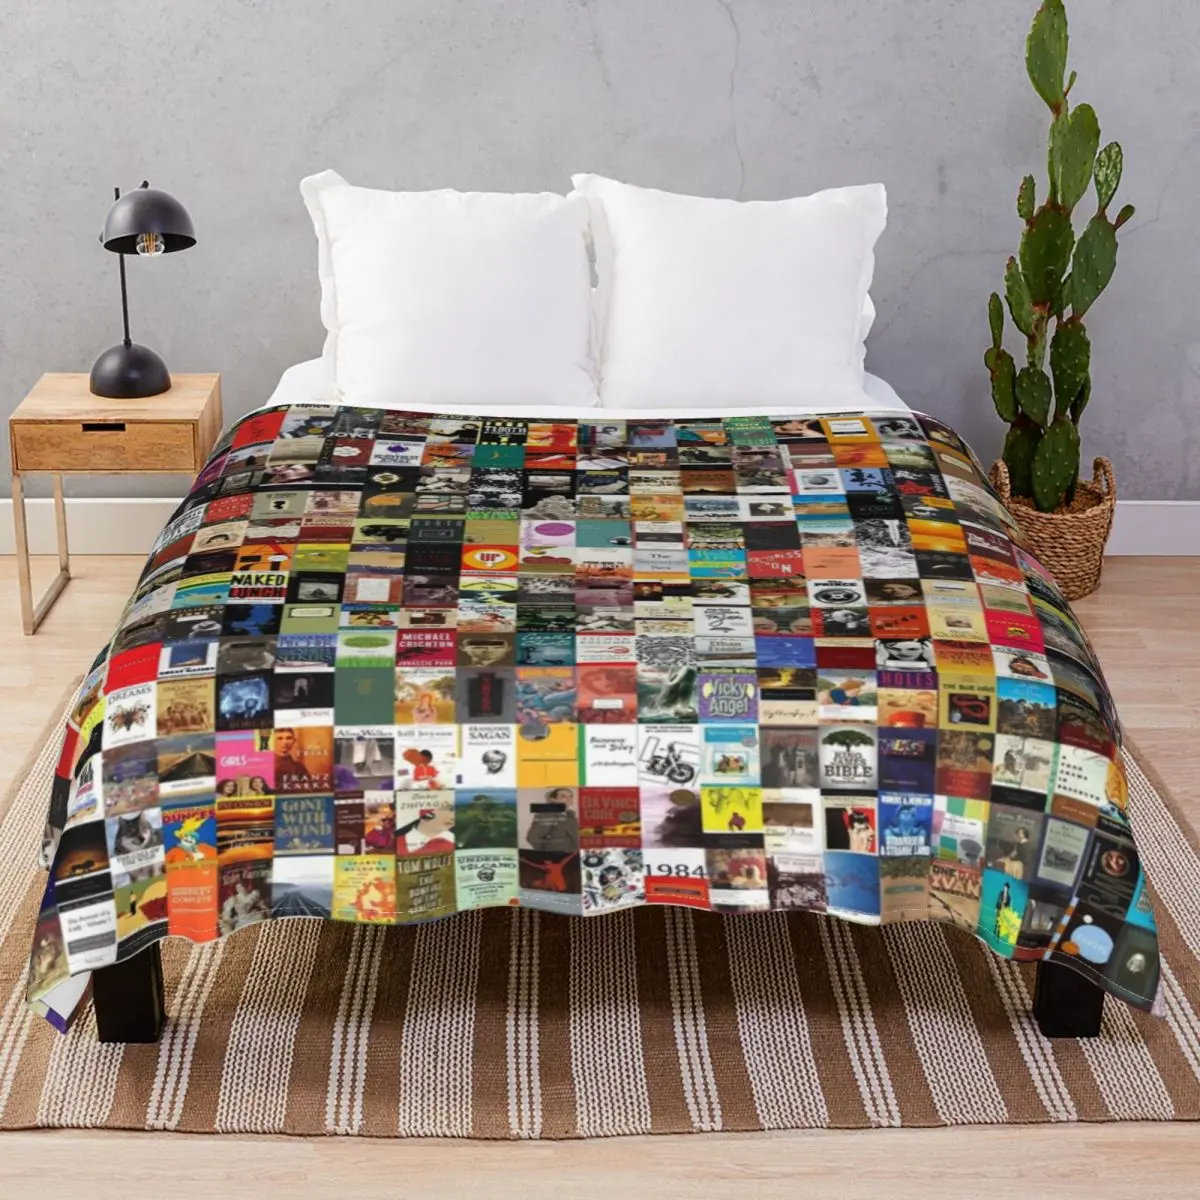 Classic Books Blankets Coral Fleece Summer Lightweight Thin Throw Blanket for Bedding Sofa Camp Office